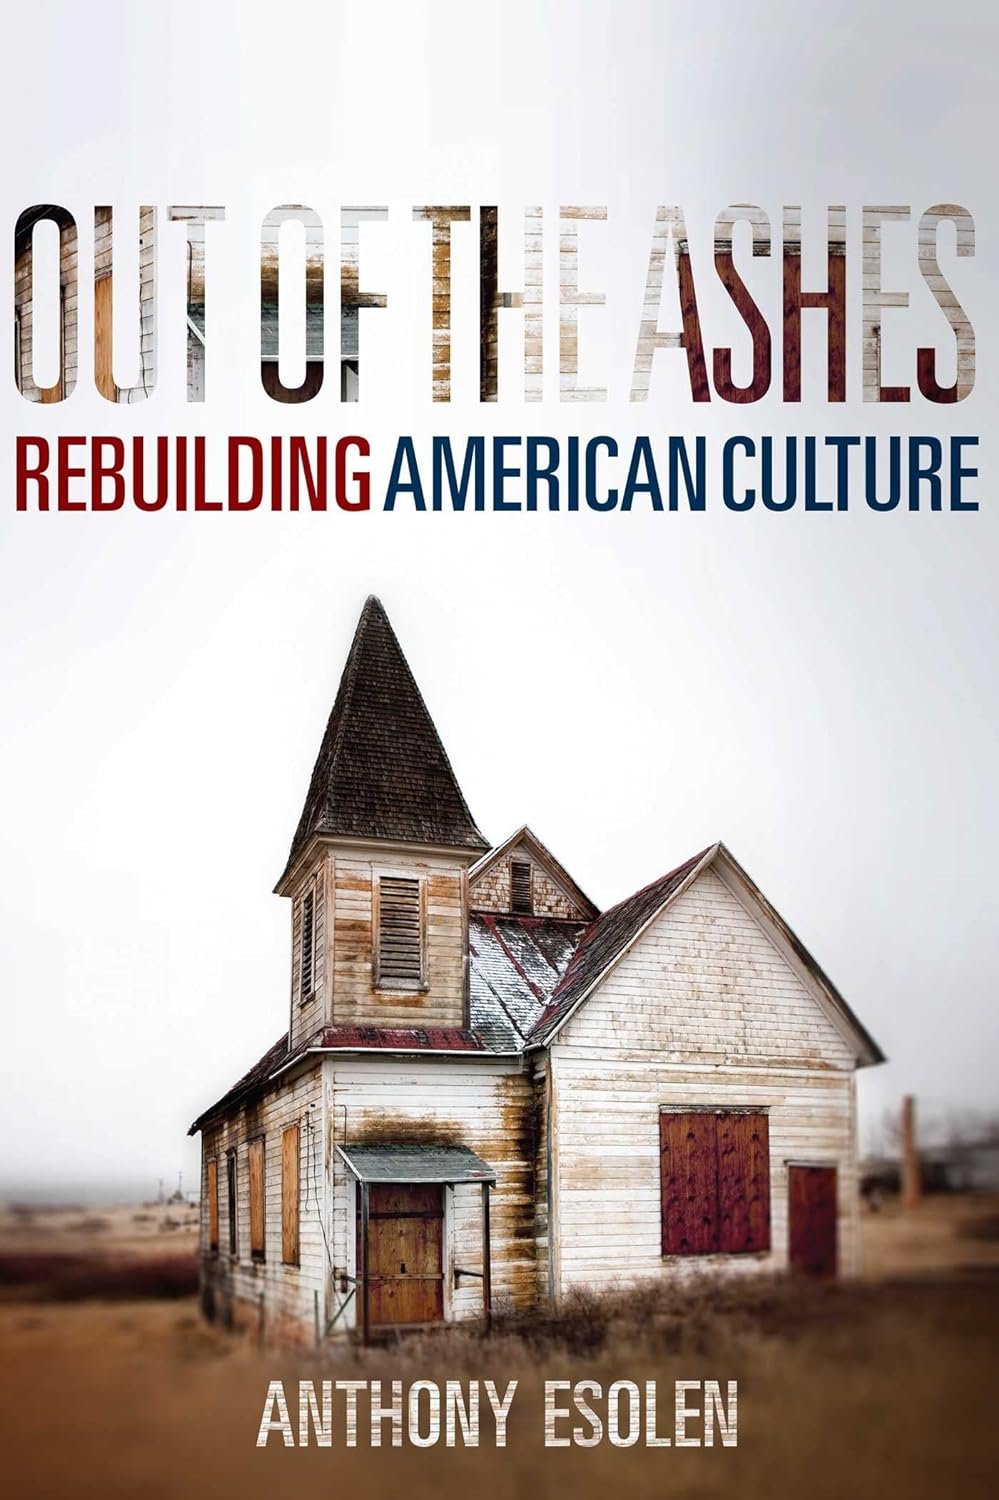 Out of the Ashes: Rebuilding American Culture